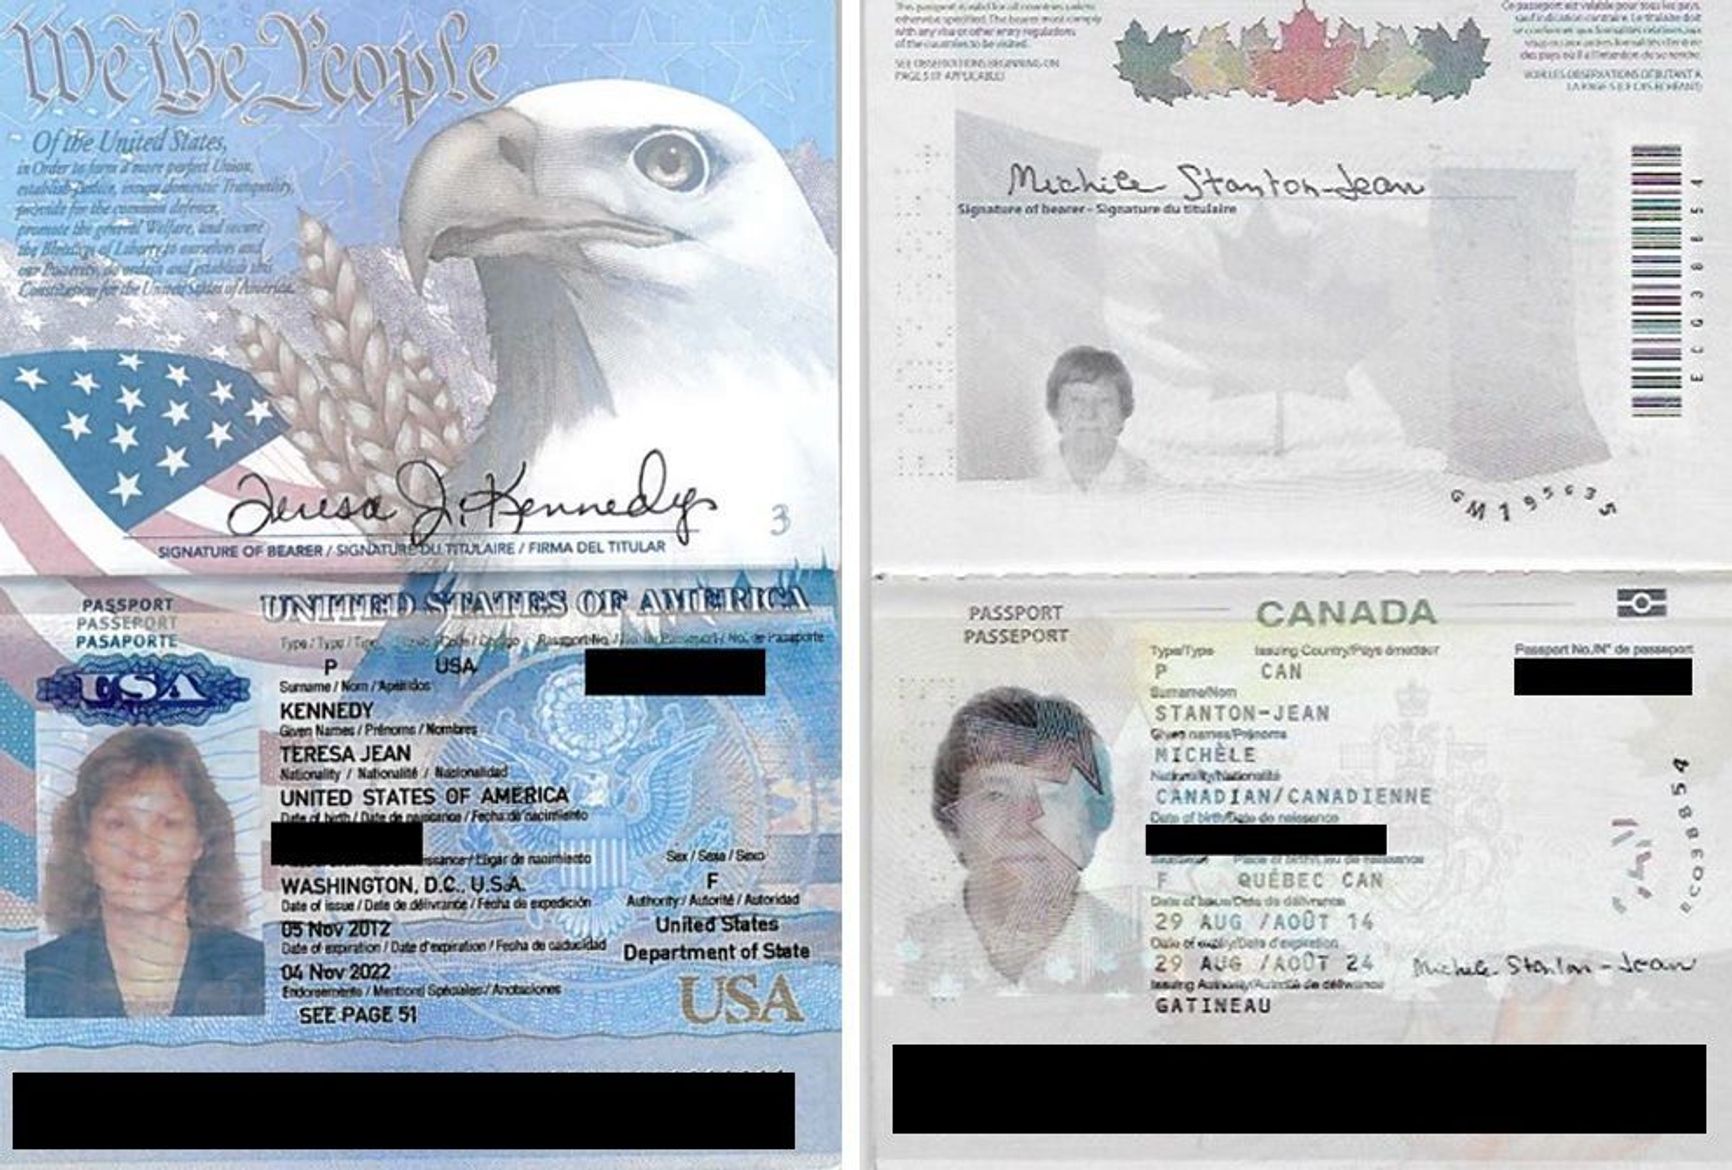 Copies of Teresa Kennedy's and Michele Stanton-Jean's passports, found in the possession of the GRU